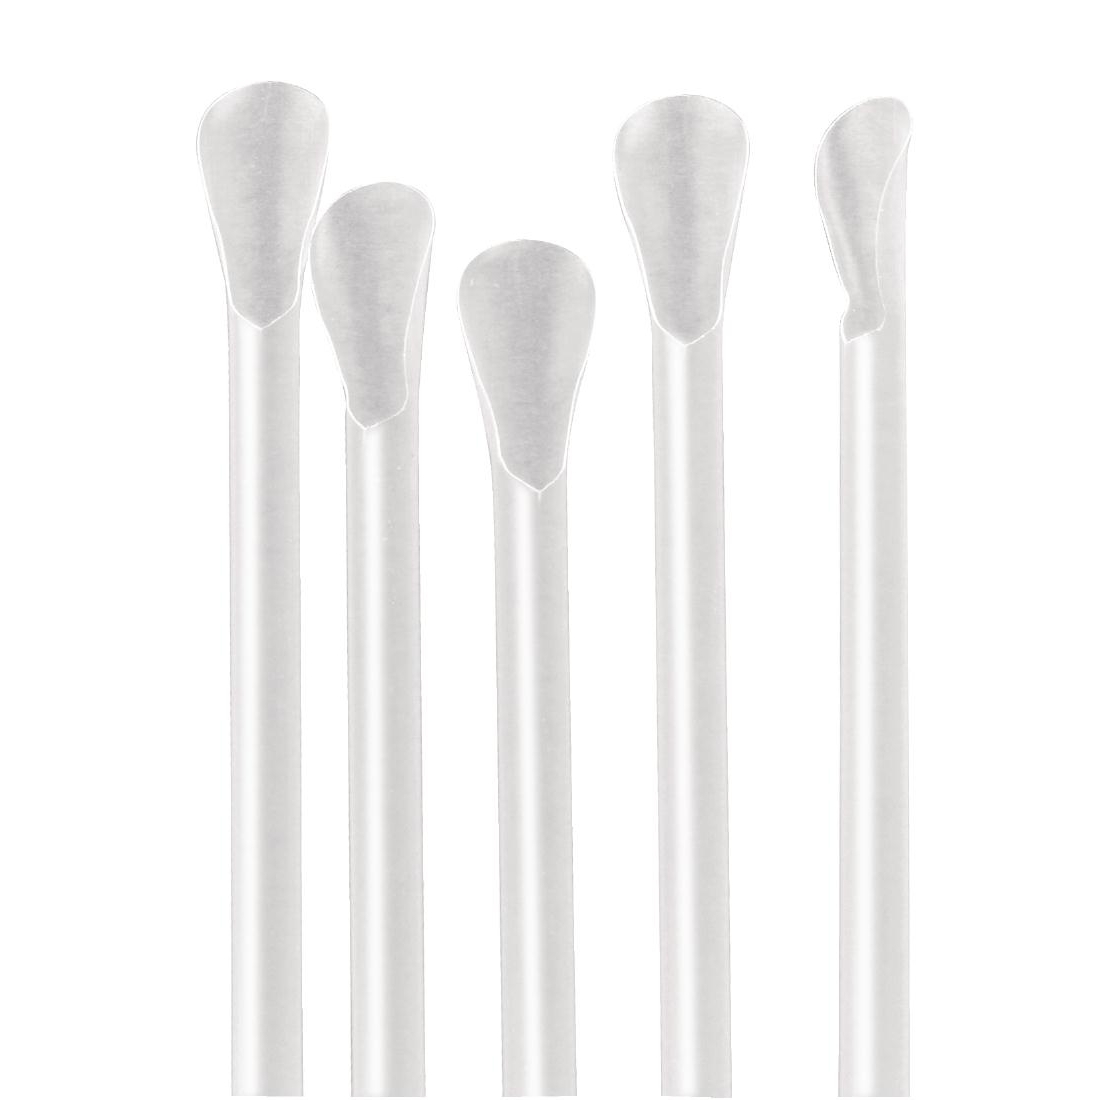 ce239-spoon-straw-clear-group